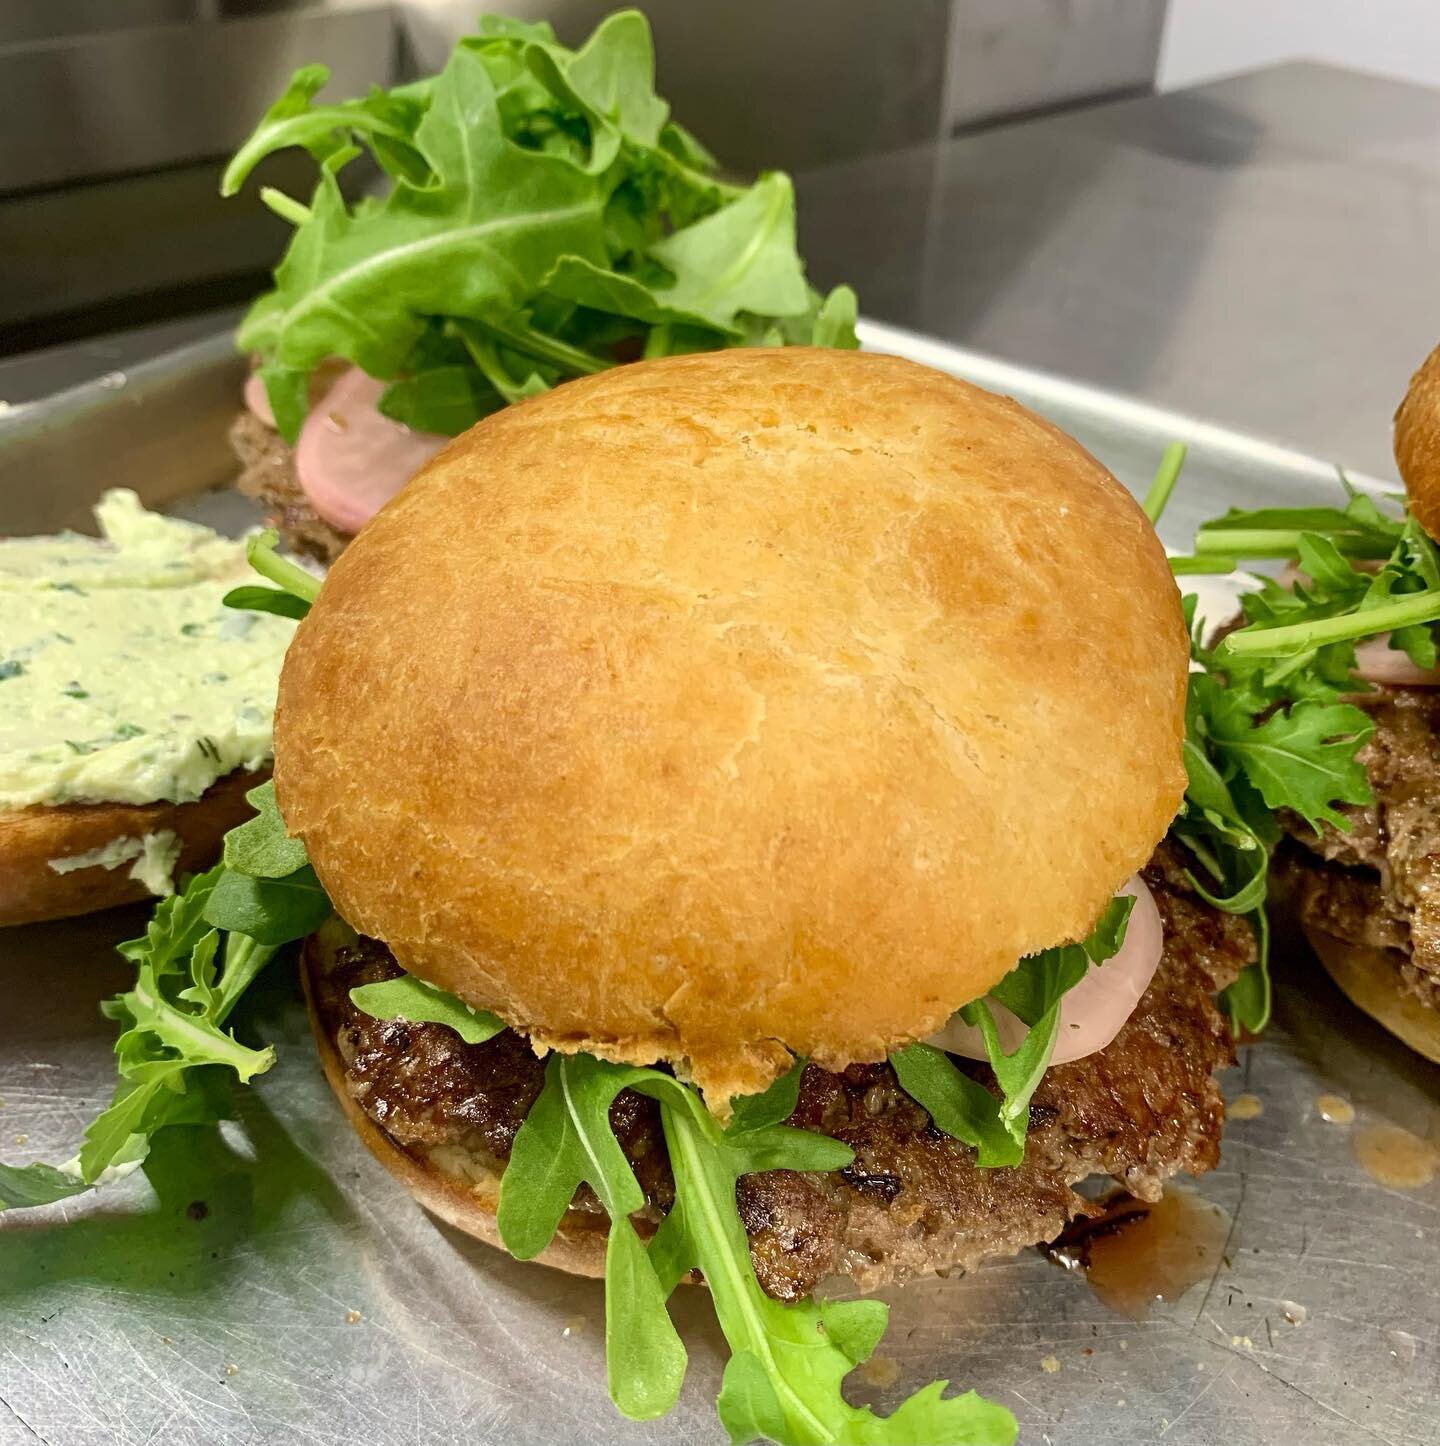 Smash burger with pickled radishes and whipped Flathead feta spread will be one seasonal special on our menu next Thursday evening (May 18) when we open in Florence! Stoked to feed our neighbors at the corner of 93, Old Hwy 93 and Rowan Rd, from 5 to